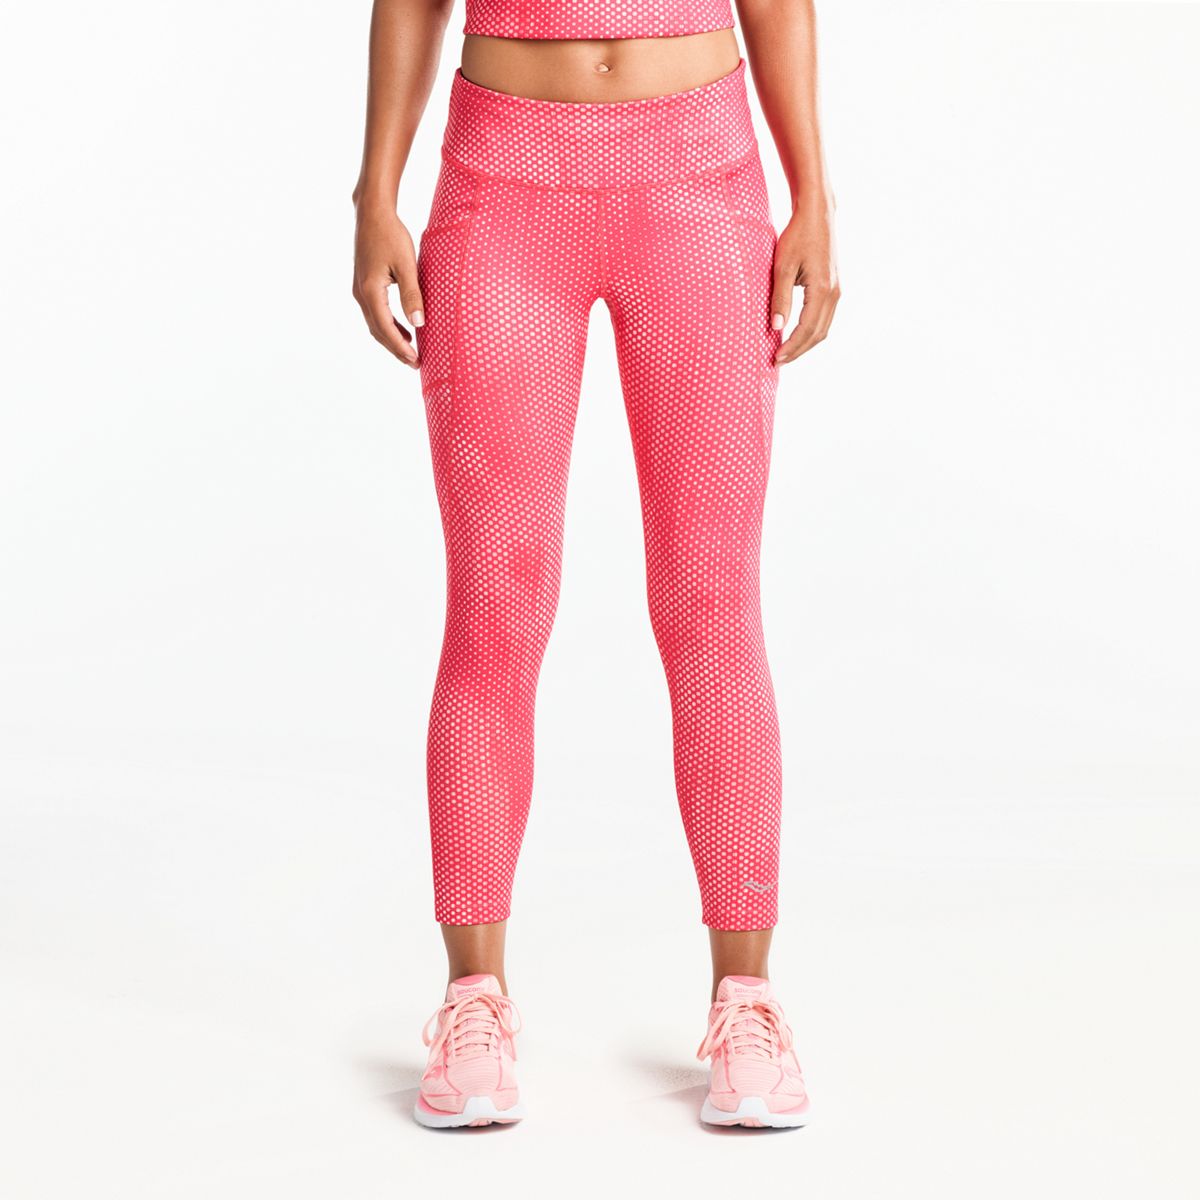 saucony running tights